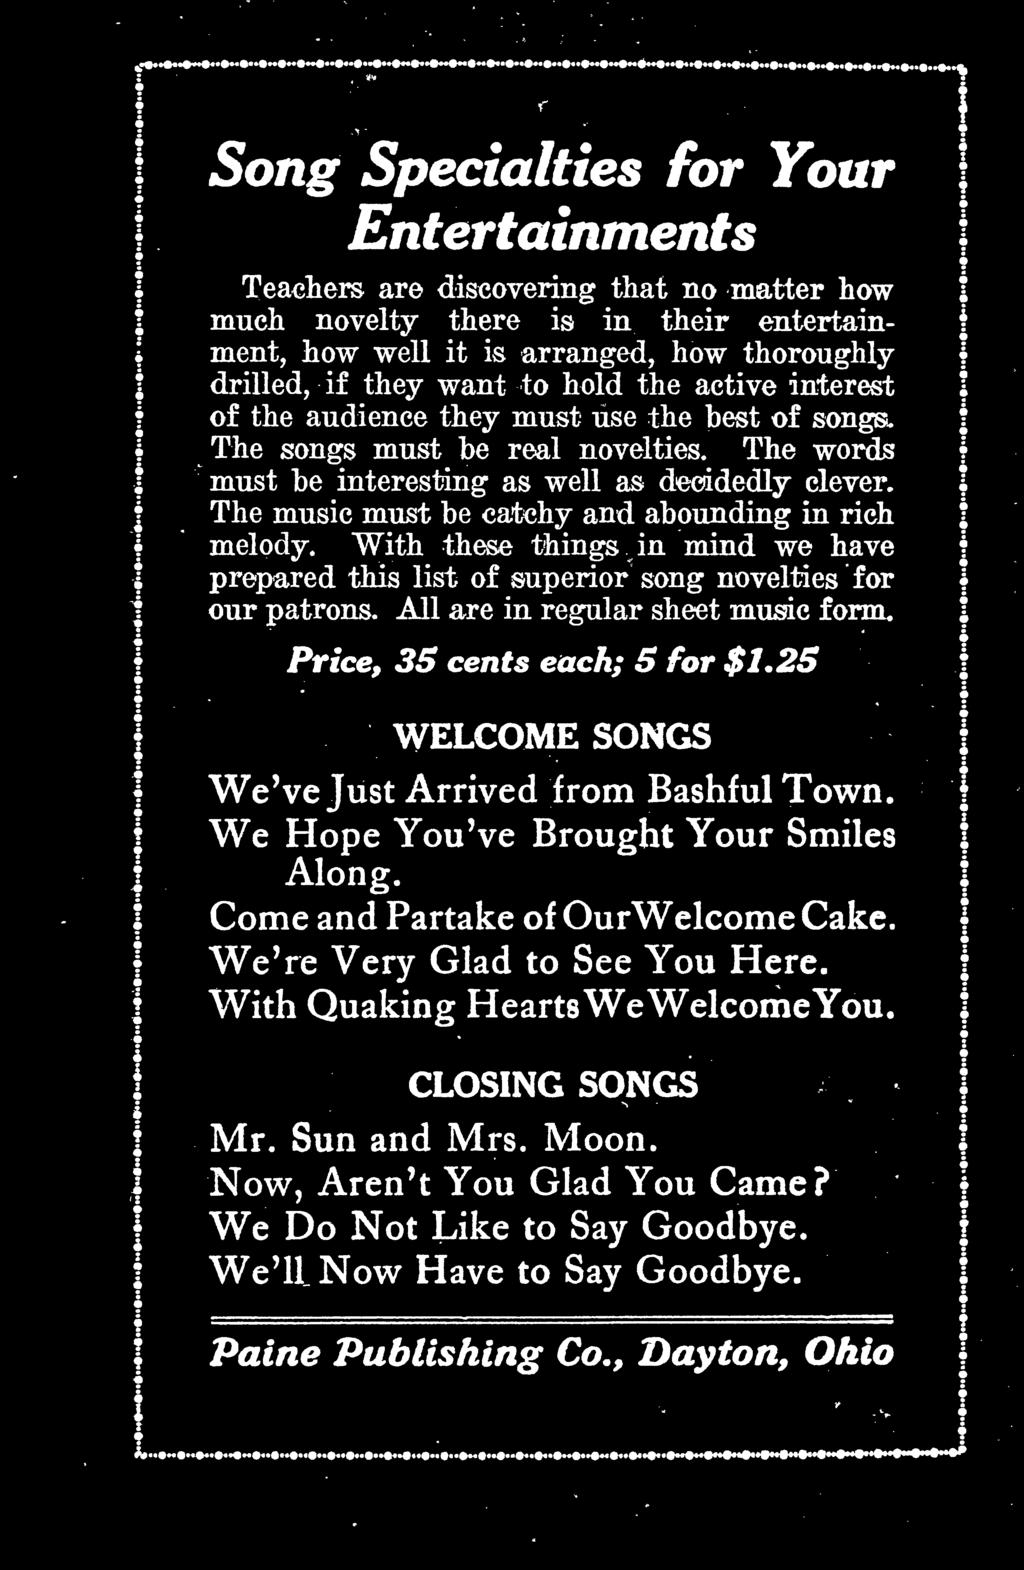 25 i I WELCOME SONGS We've Just Arrived from Bashful Town. We Hope You've Brought Your Smiles Along. Come and Partake of OurWelcome Cake. We're Very Glad to See You Here.